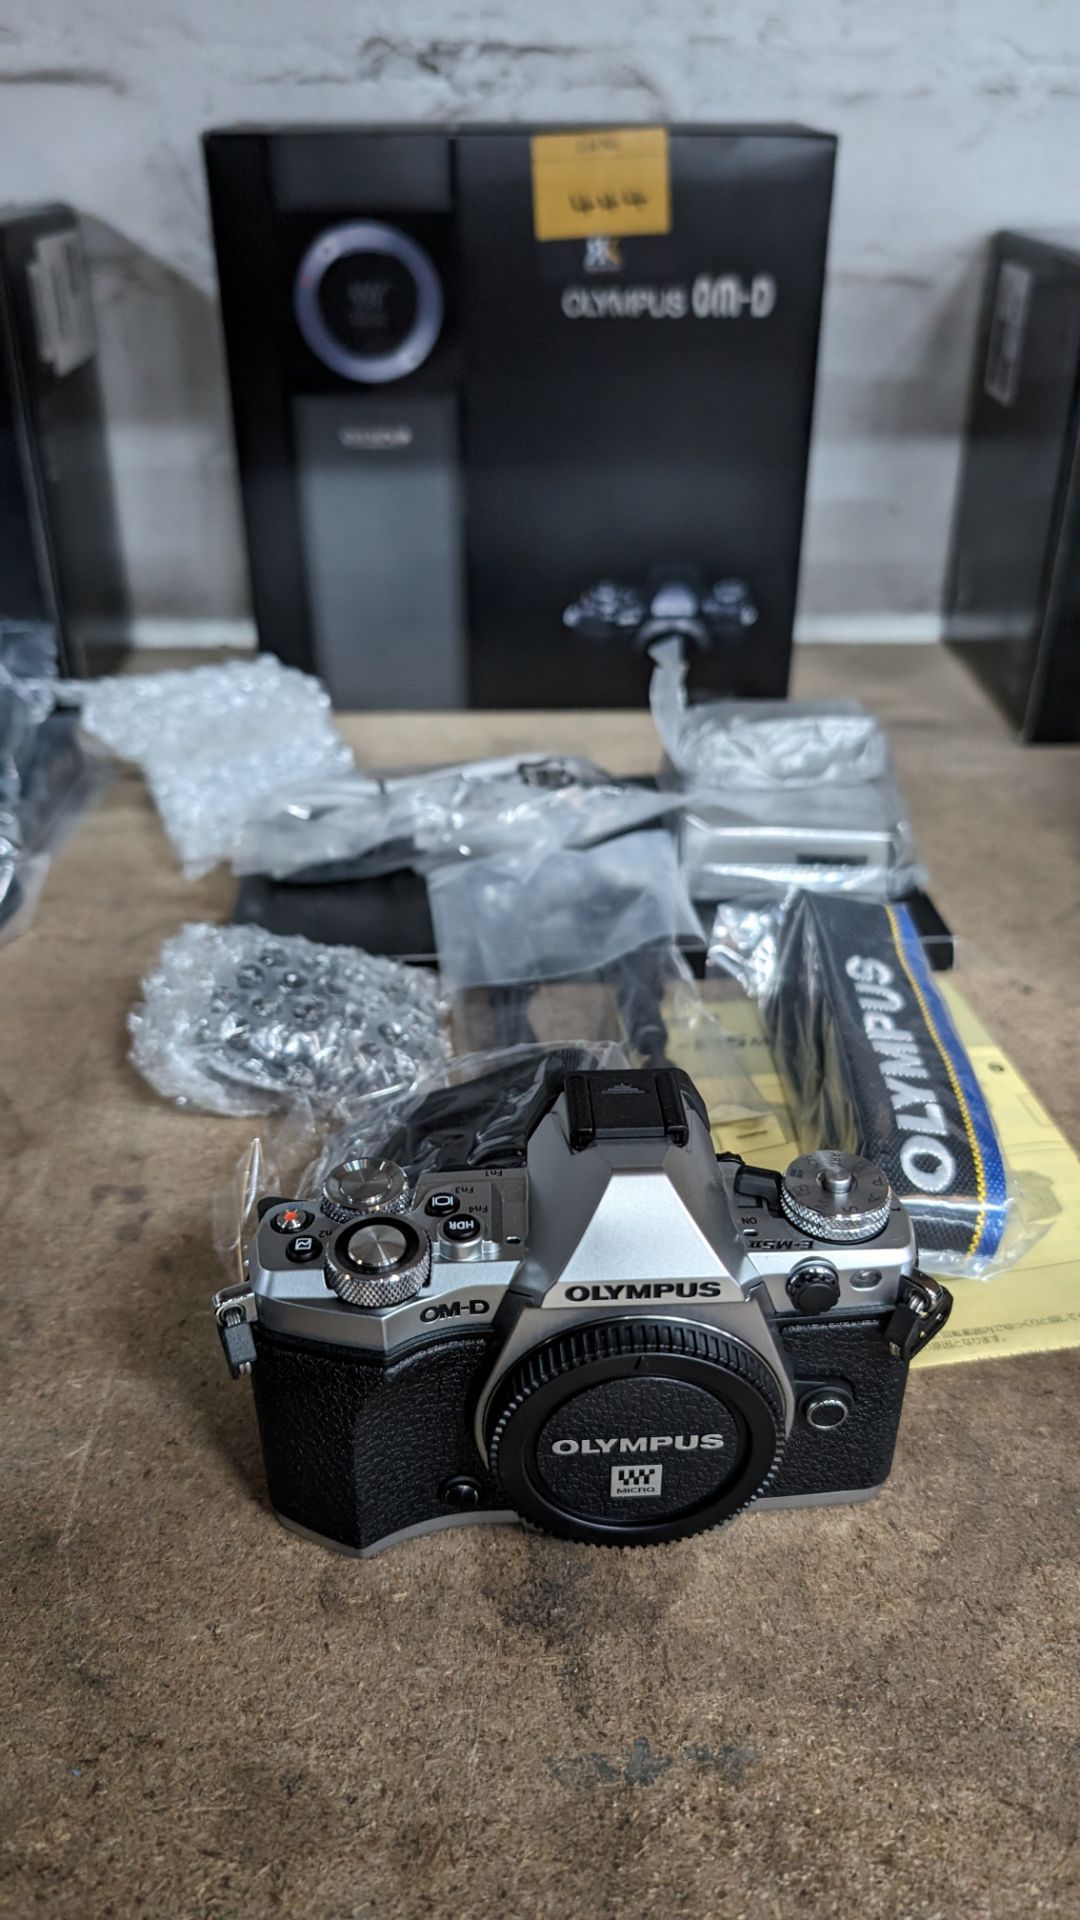 Olympus OM-D E-M5 Mark II camera kit, including camera body, electronic flash, strap, battery, charg - Image 12 of 12